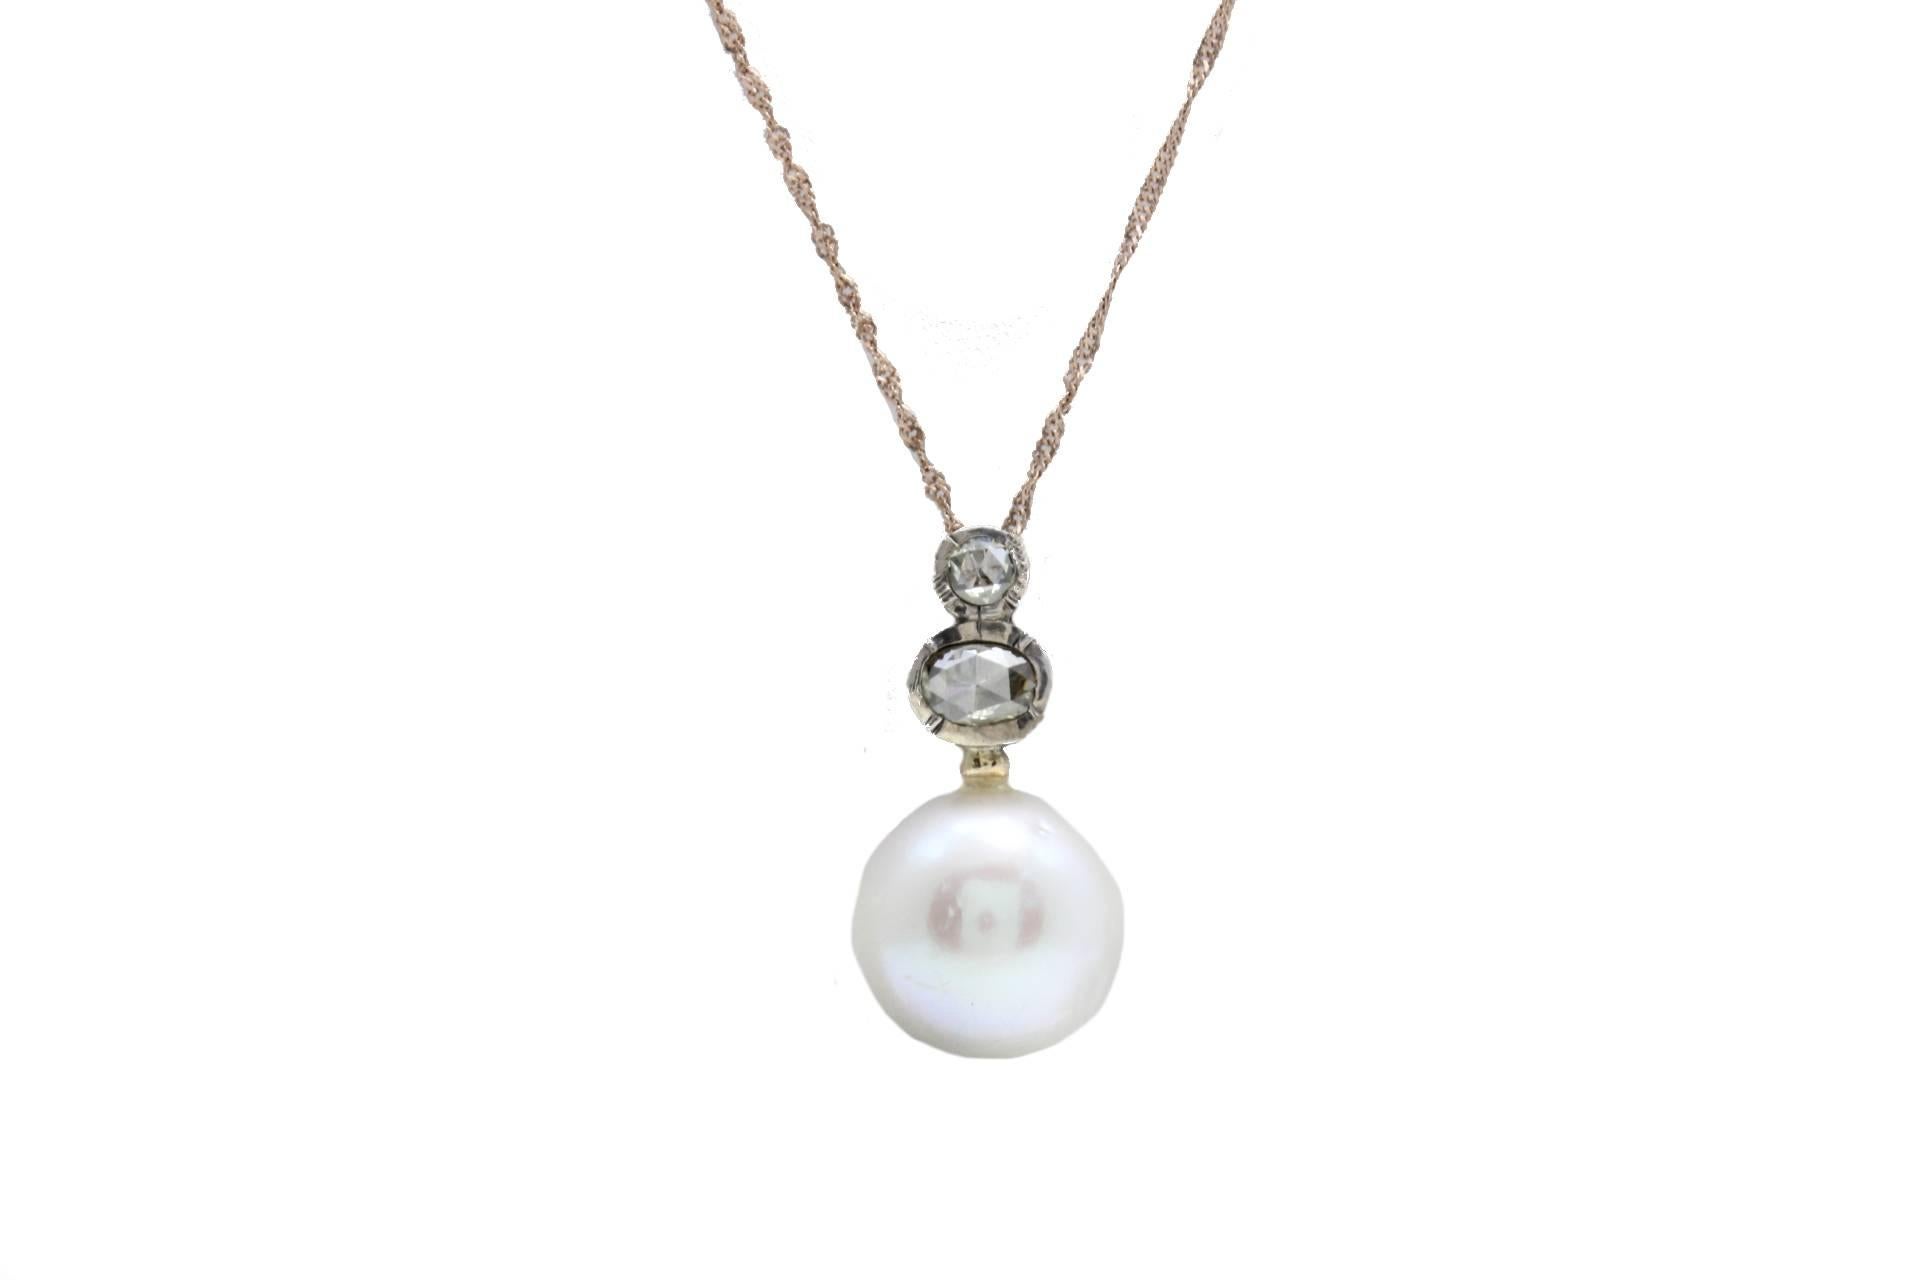 Graceful pendant necklace in 9Kt yellow gold composed of a large pearl on the bottom of two encrusted diamonds in silver and gold and a gold chain.
diamonds 1.12kt
pearl 22.62gr- Diameter 15 mm
Lenght Pendant 2.9 cm
tot weight 8.1gr
r.f.  ffga

For